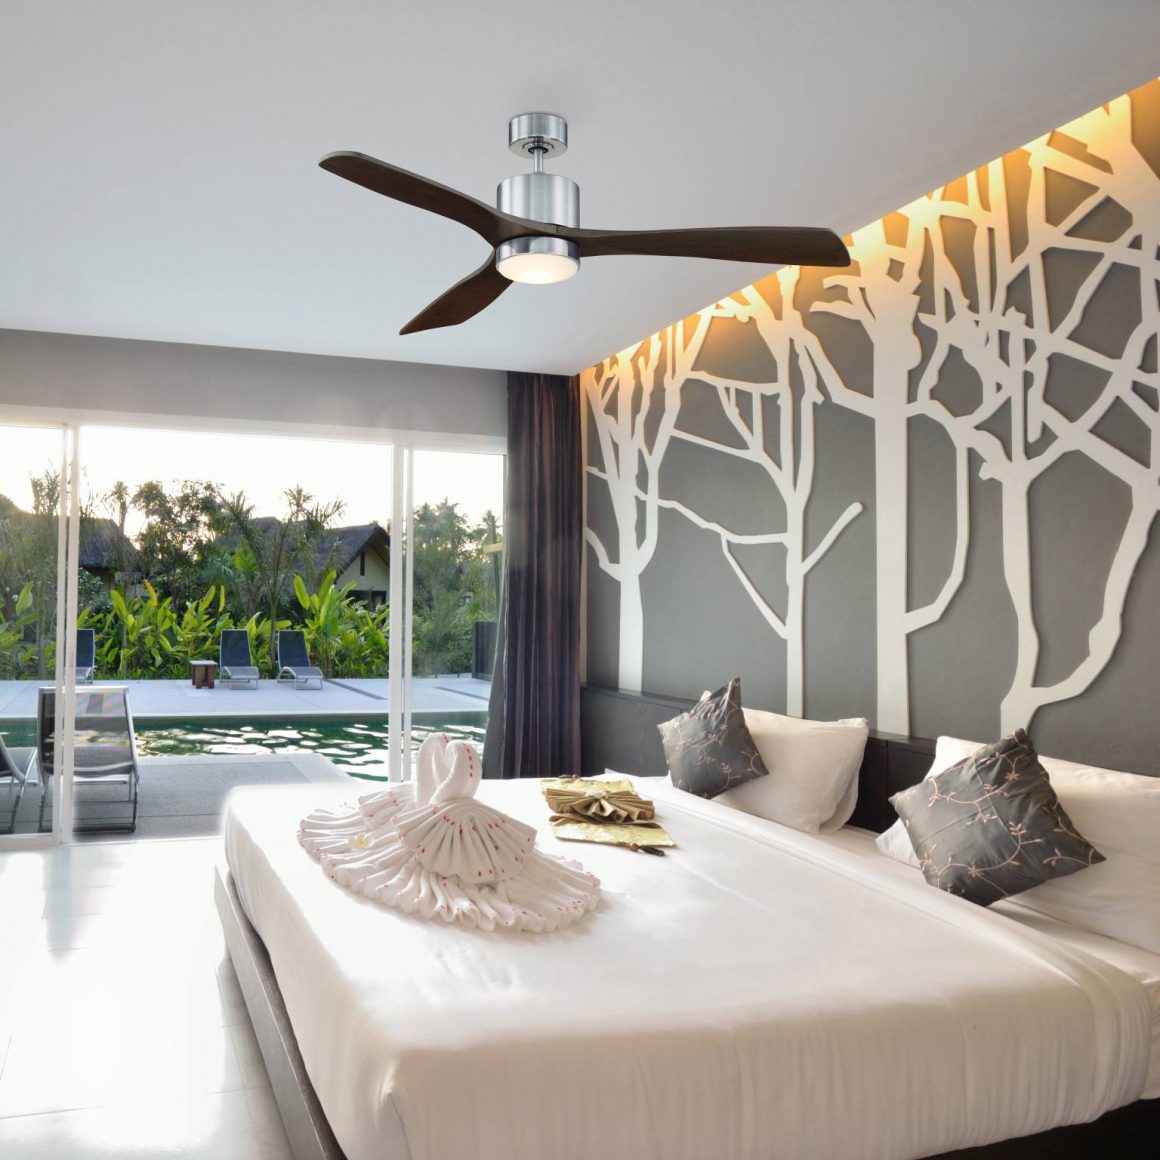 A contemporary bedroom with mid-century modern ceiling fan and large windows facing the swimming pool